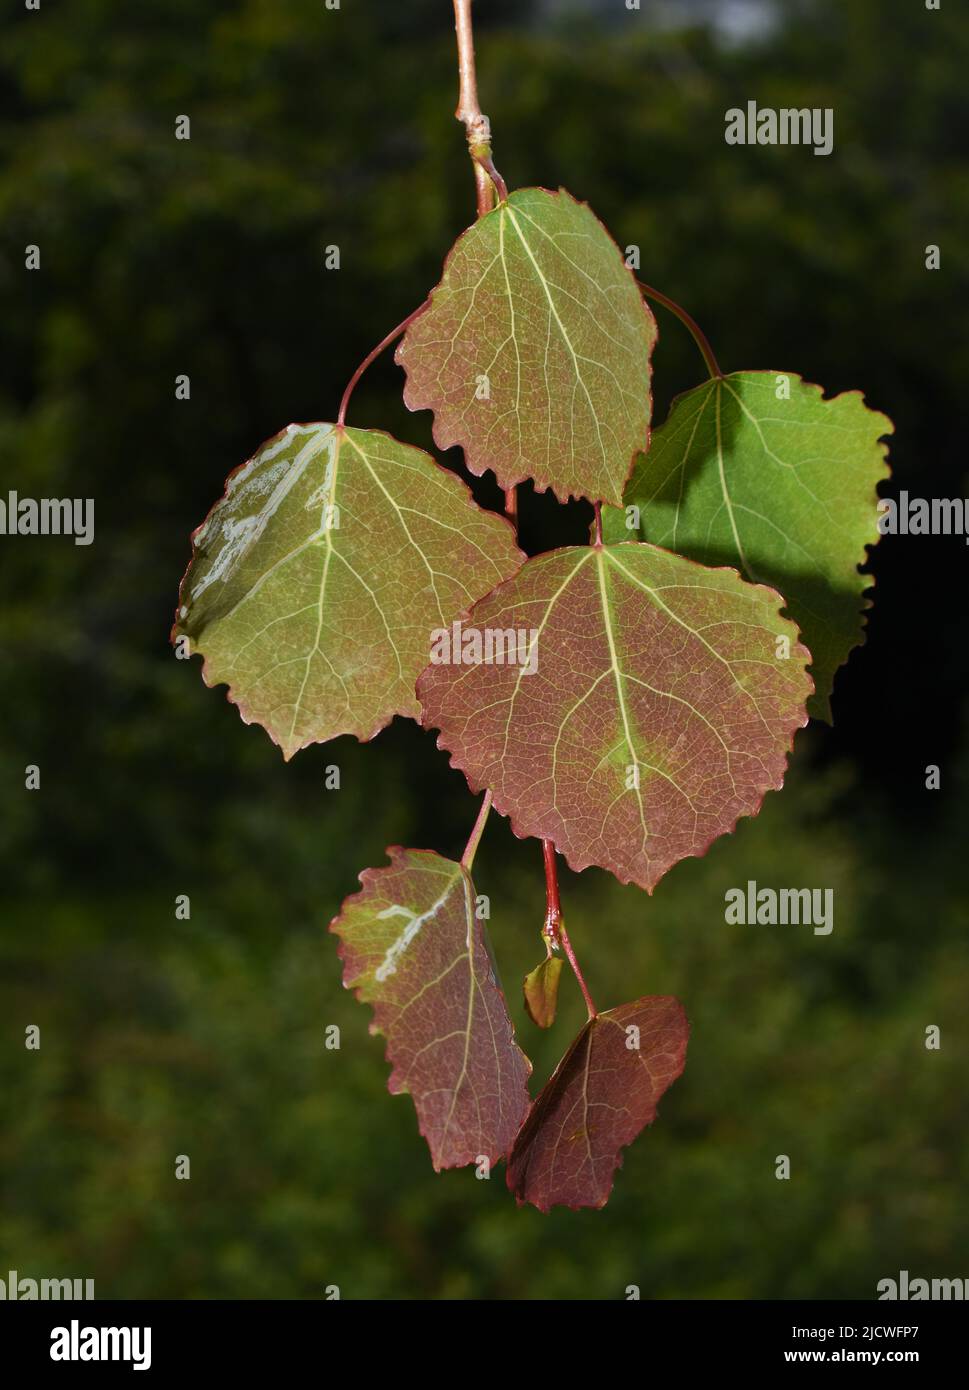 Branch from common aspen tree Populus tremula new young red and green leaves in spring Stock Photo